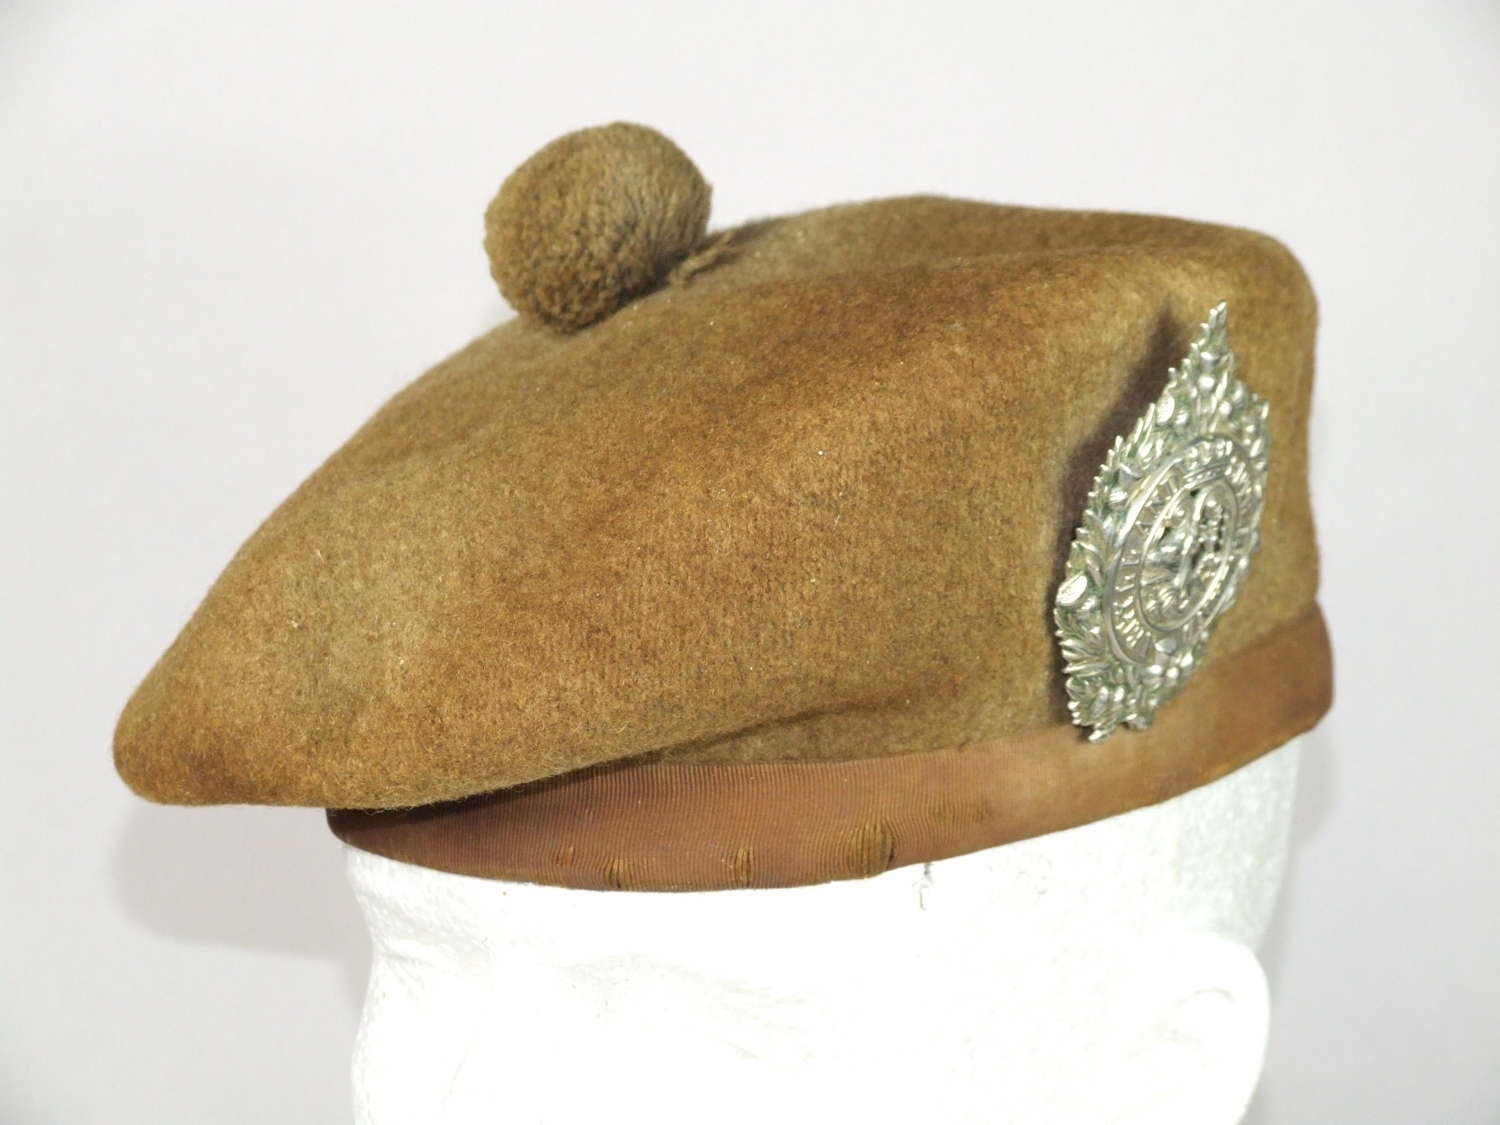 An Extremely Rare Example of a 1915 Issue Combat Khaki Balmoral Bonnet